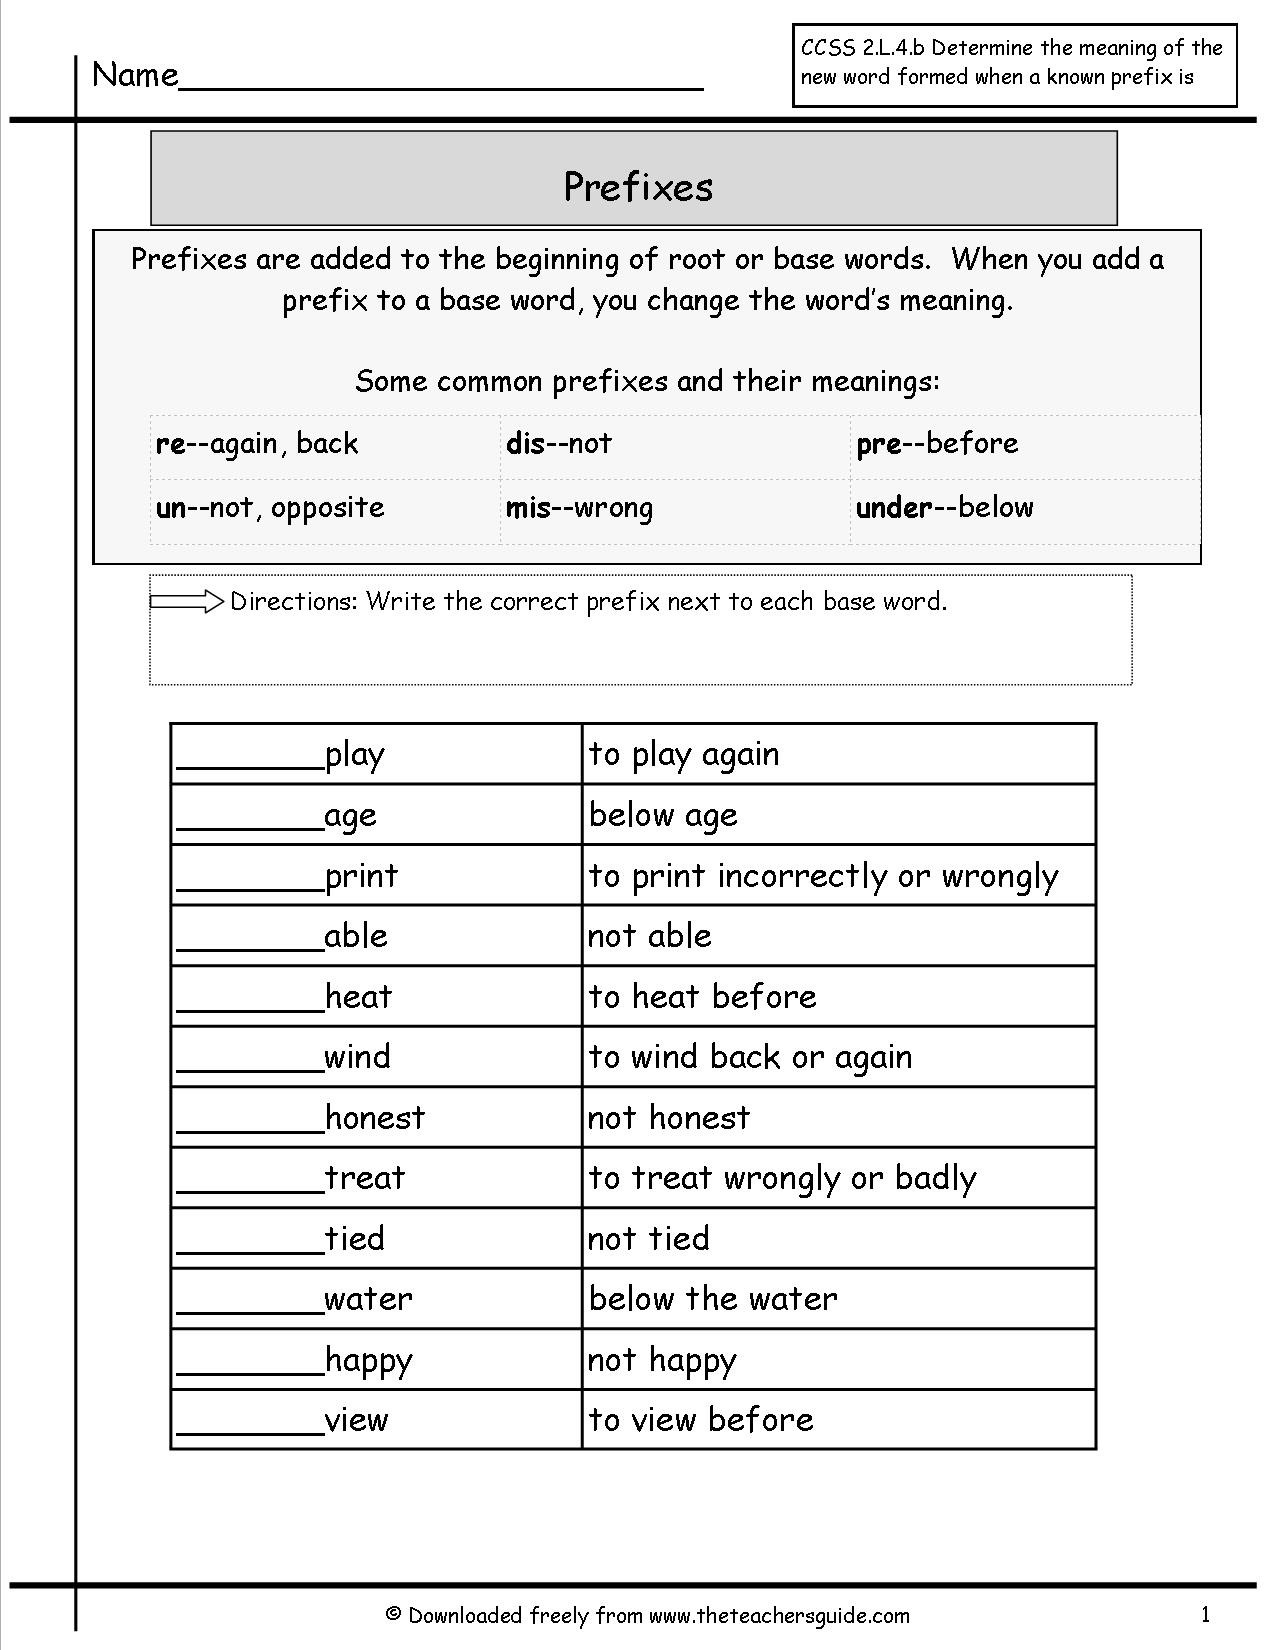 Suffixes Worksheet 3rd Grade Free Prefixes and Suffixes Worksheets From the Teacher S Guide